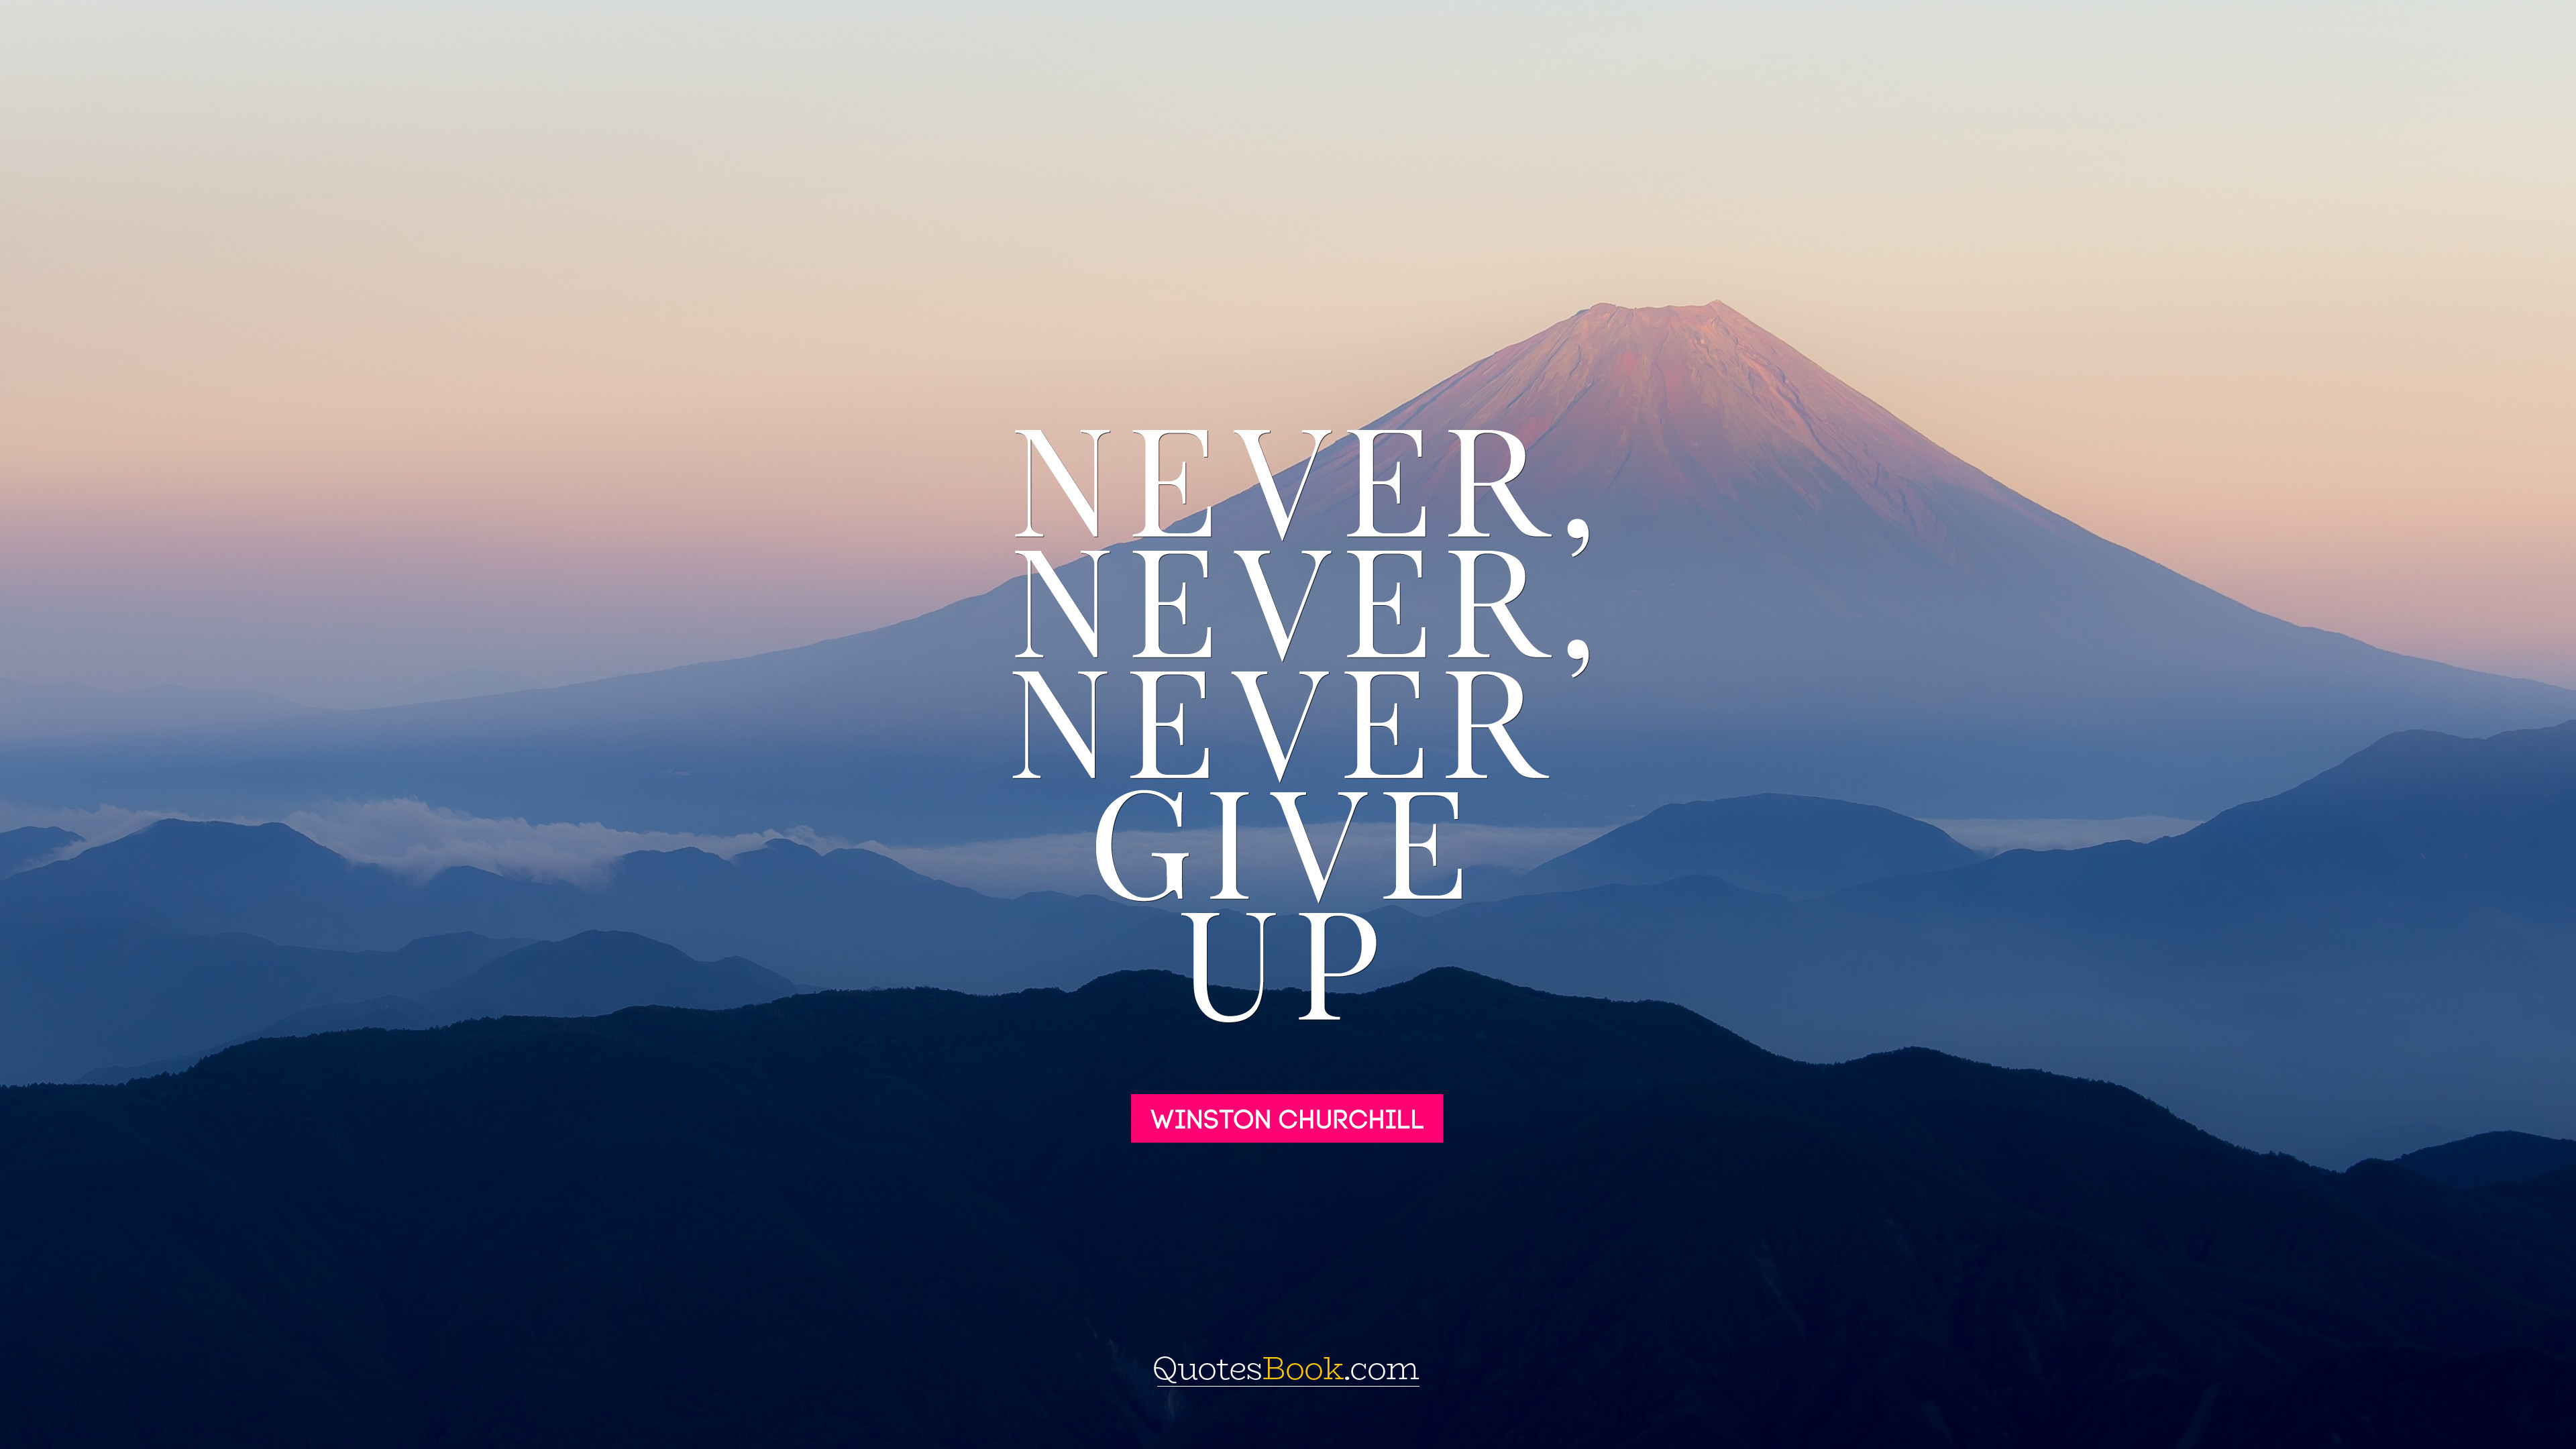 Never, never, never give up. - Quote by Winston Churchill - QuotesBook